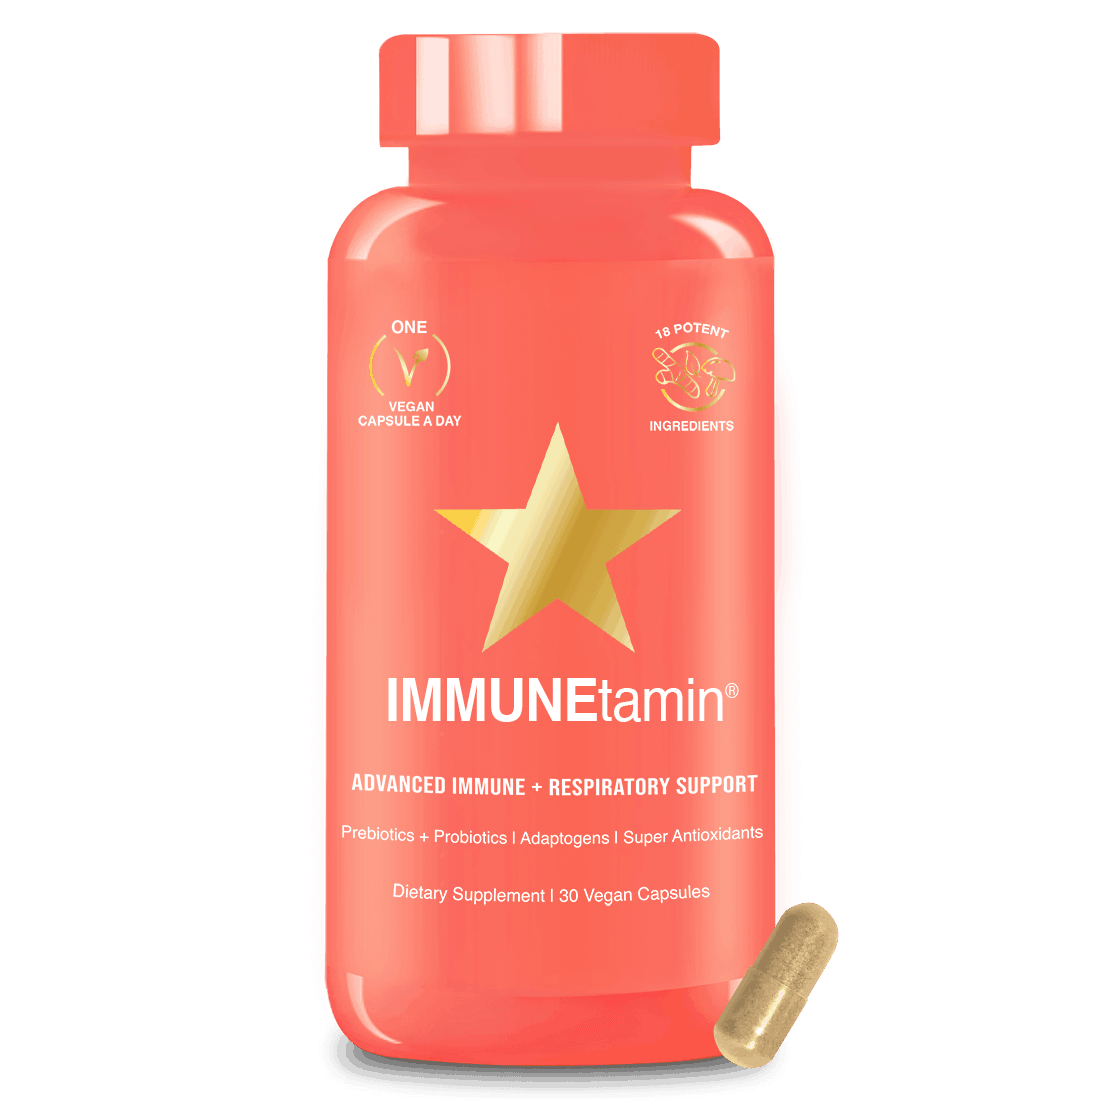 1 Month Supply - IMMUNEtamin bottle with capsule